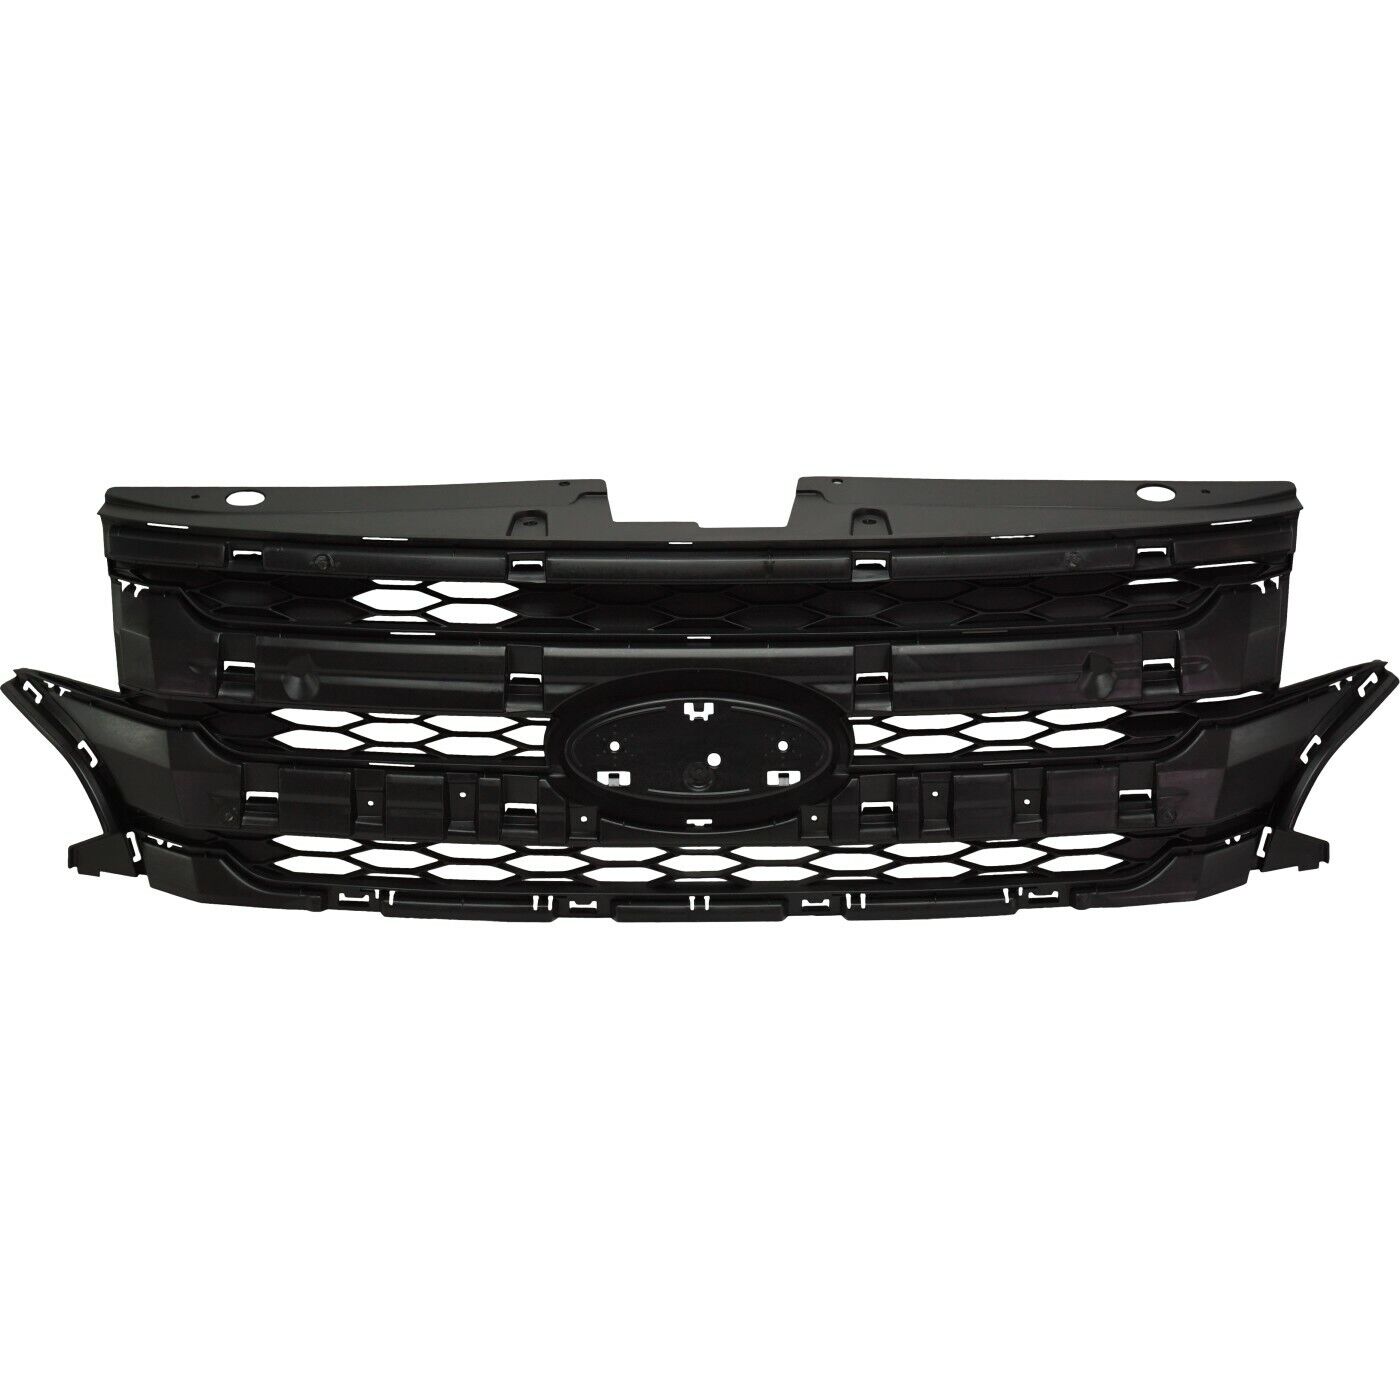 New Grille Assembly CT4Z8A284BA plastic for 2012-2014 Ford Edge Limited, SE, SEL